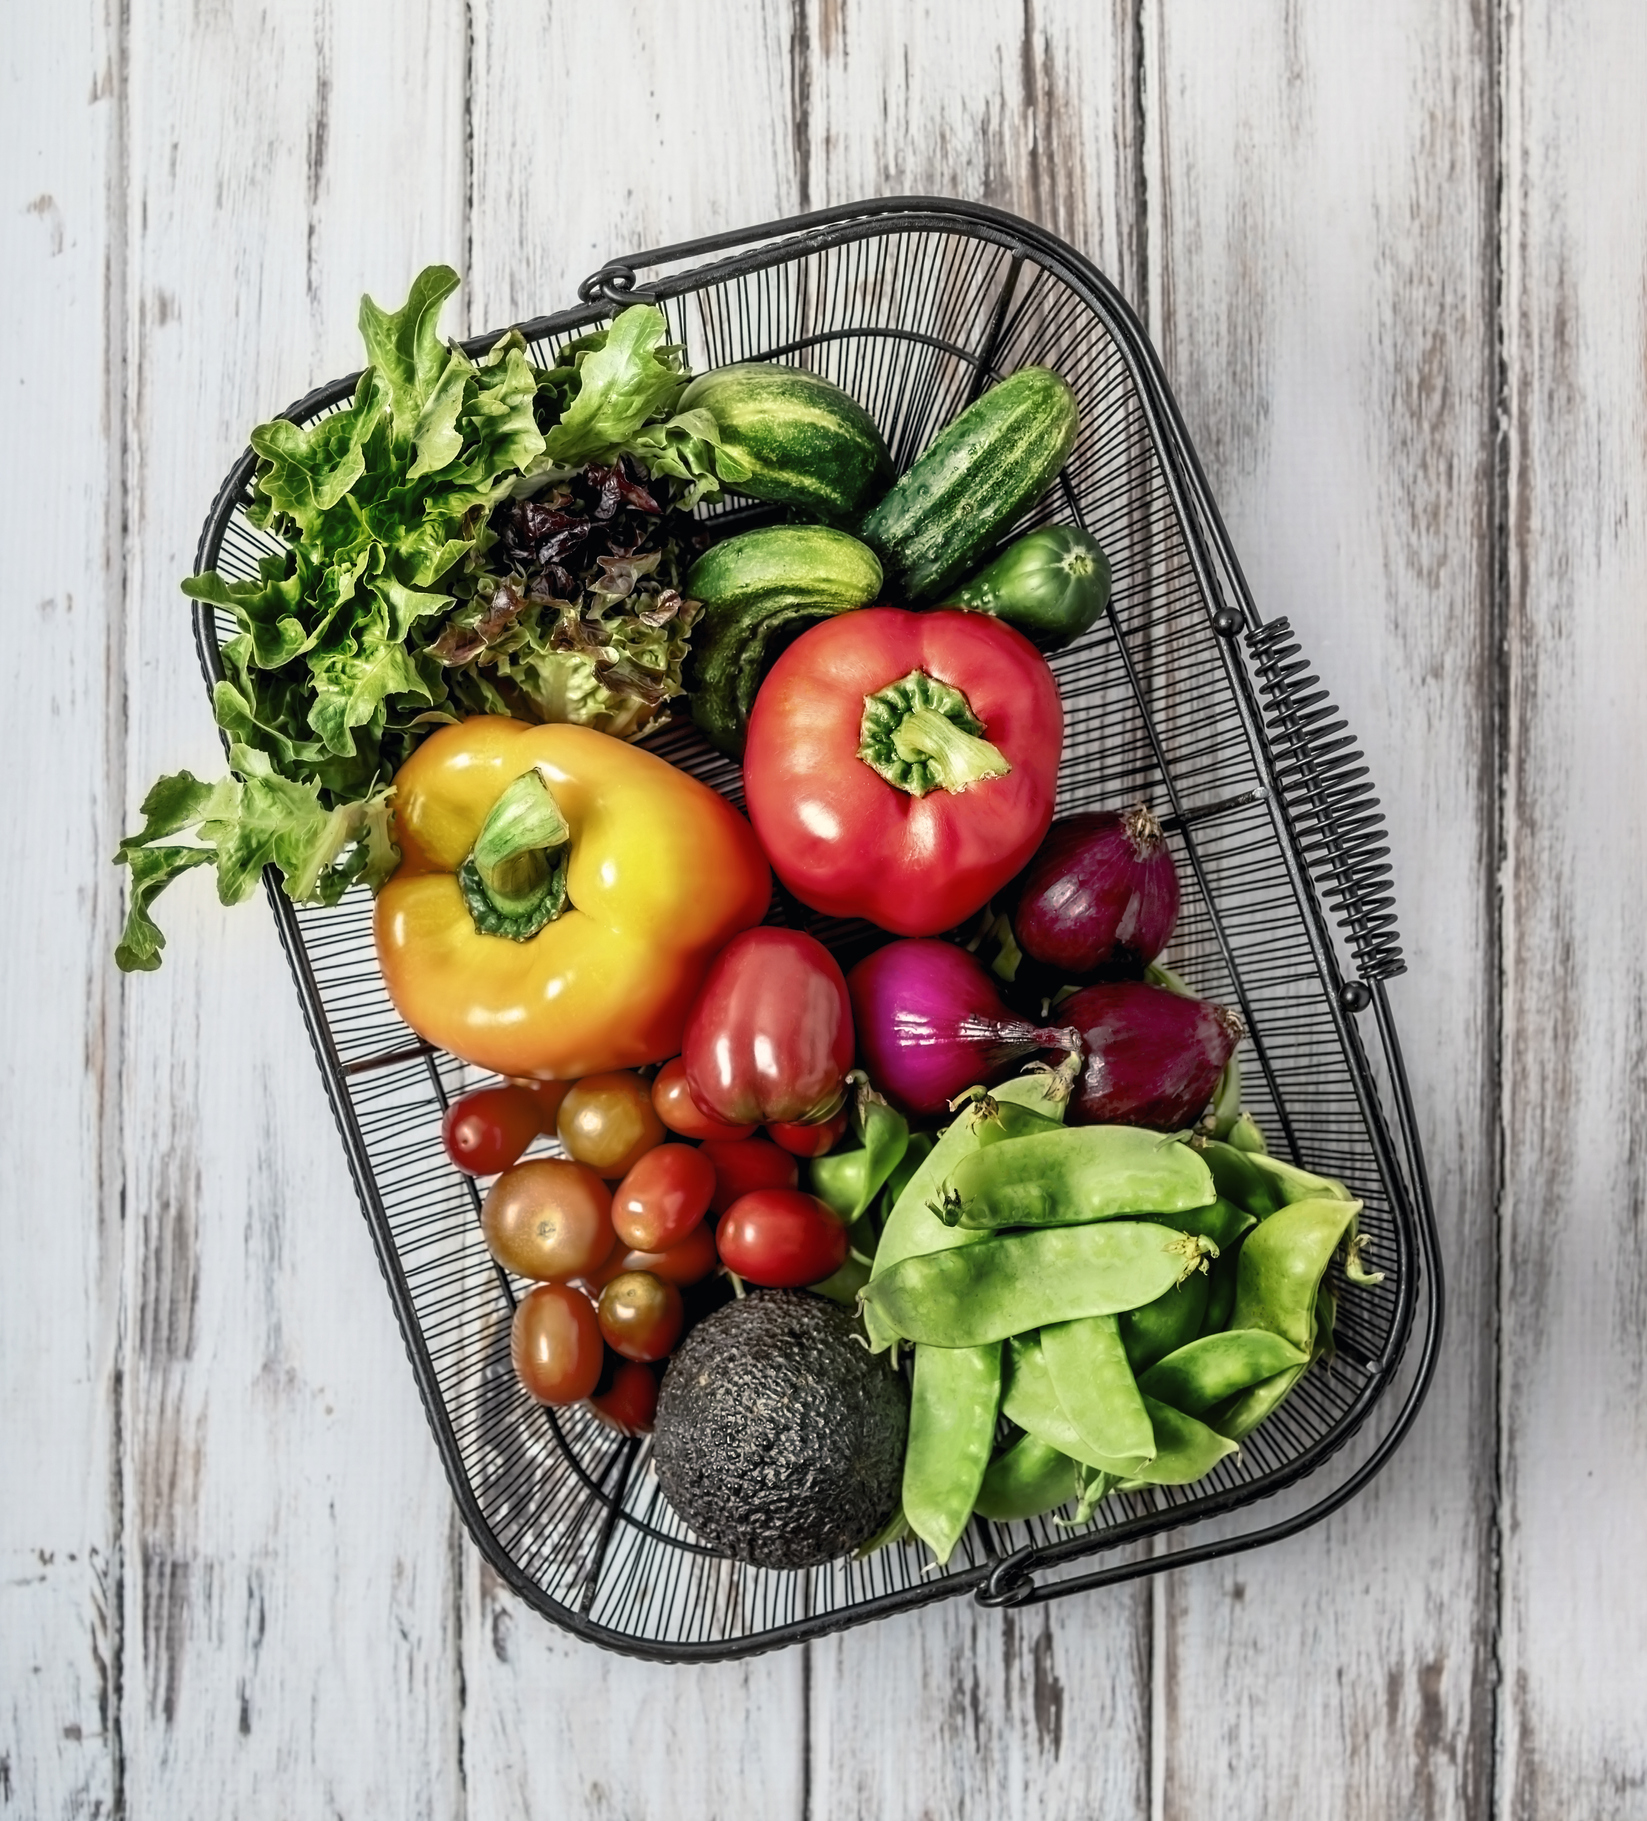 A basket of fresh fruits and vegetables on white background